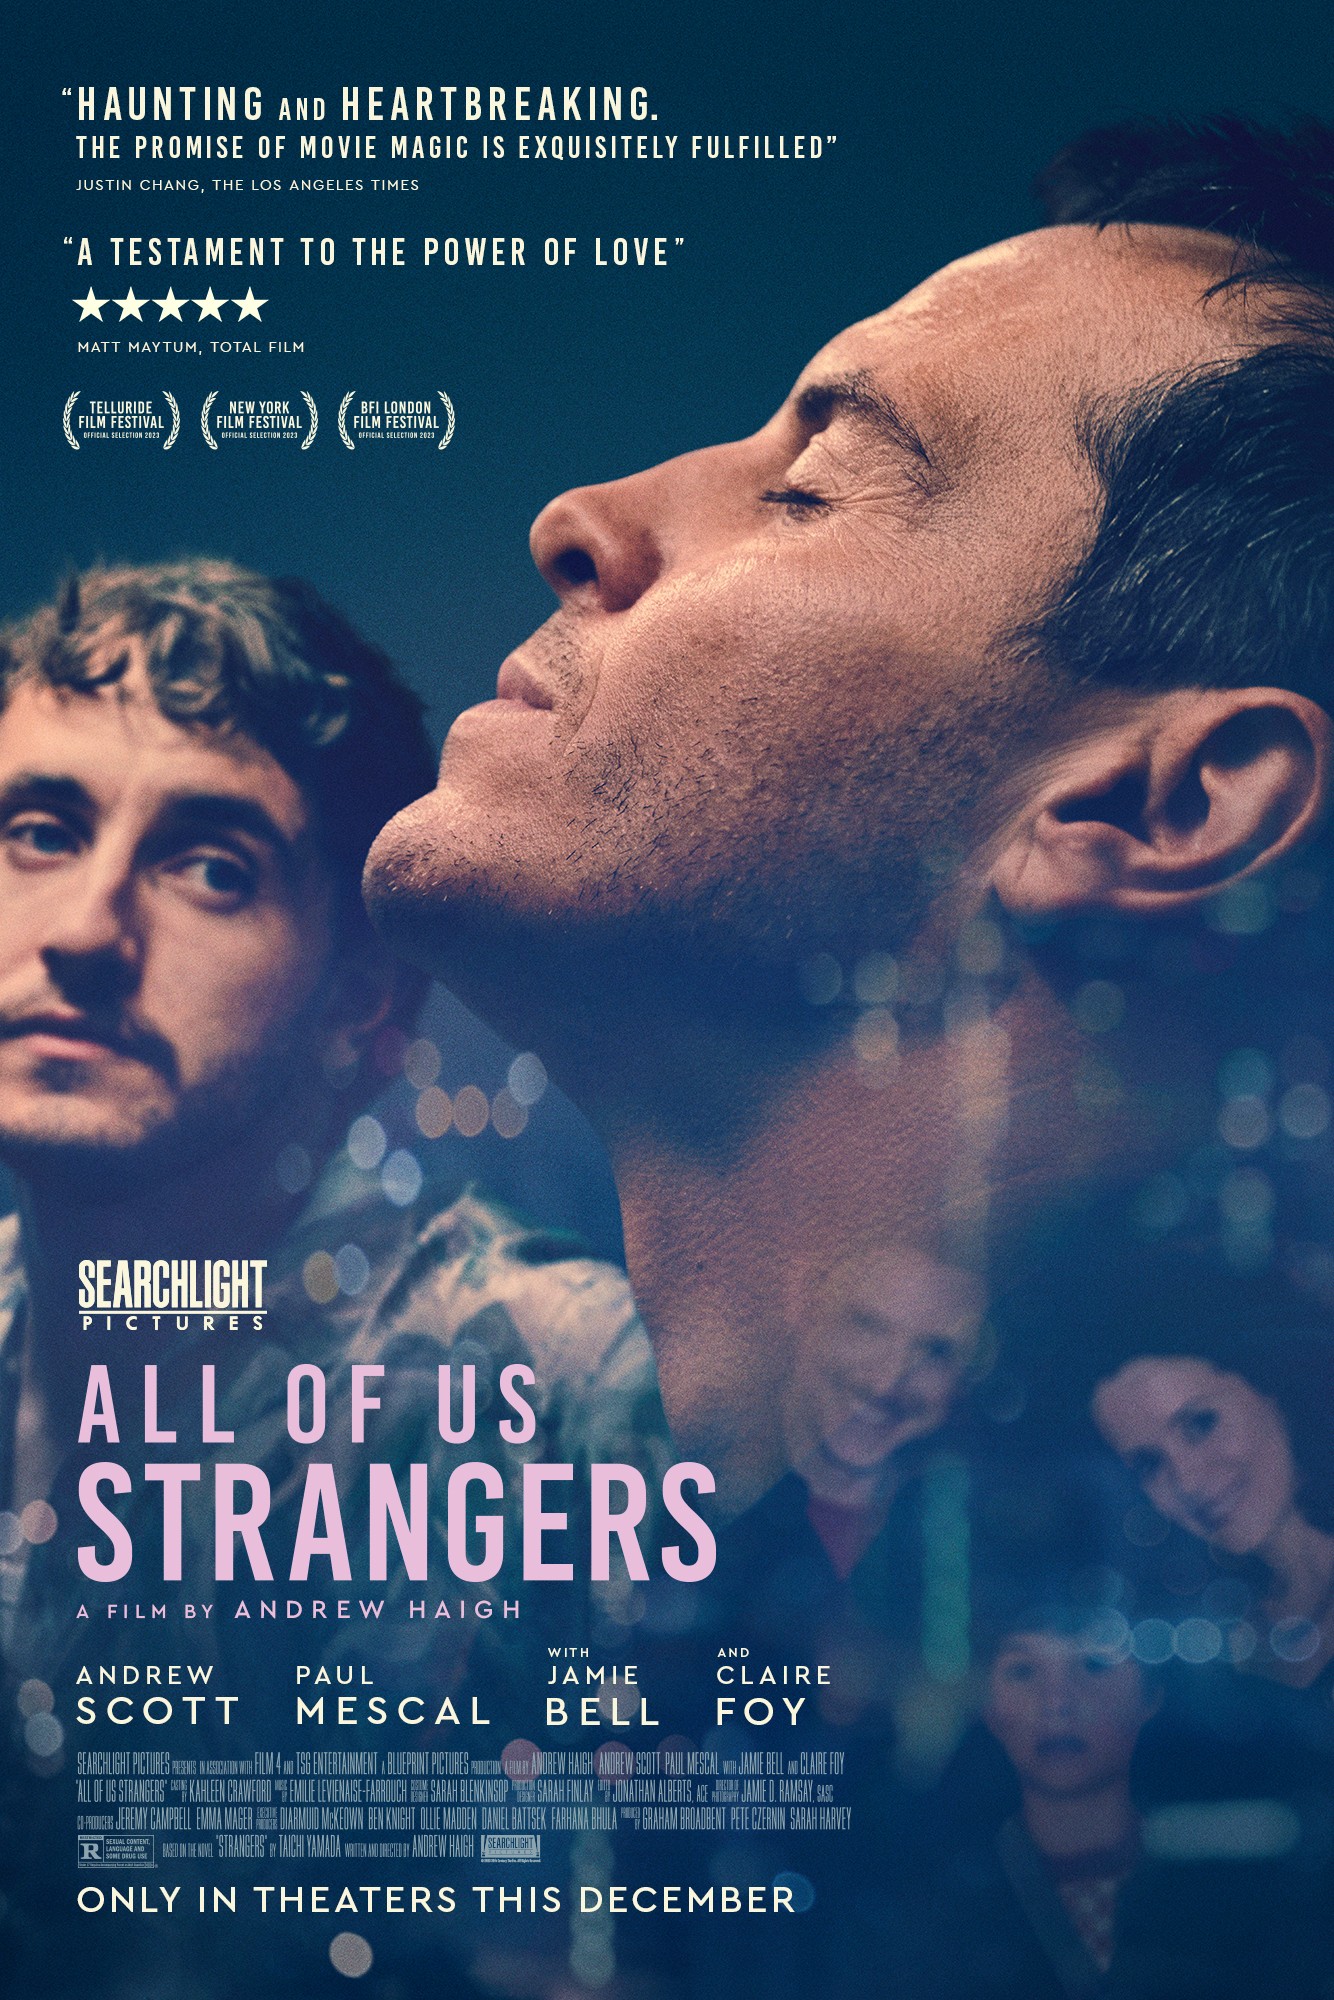 Reviews: All of Us Are Dead - IMDb